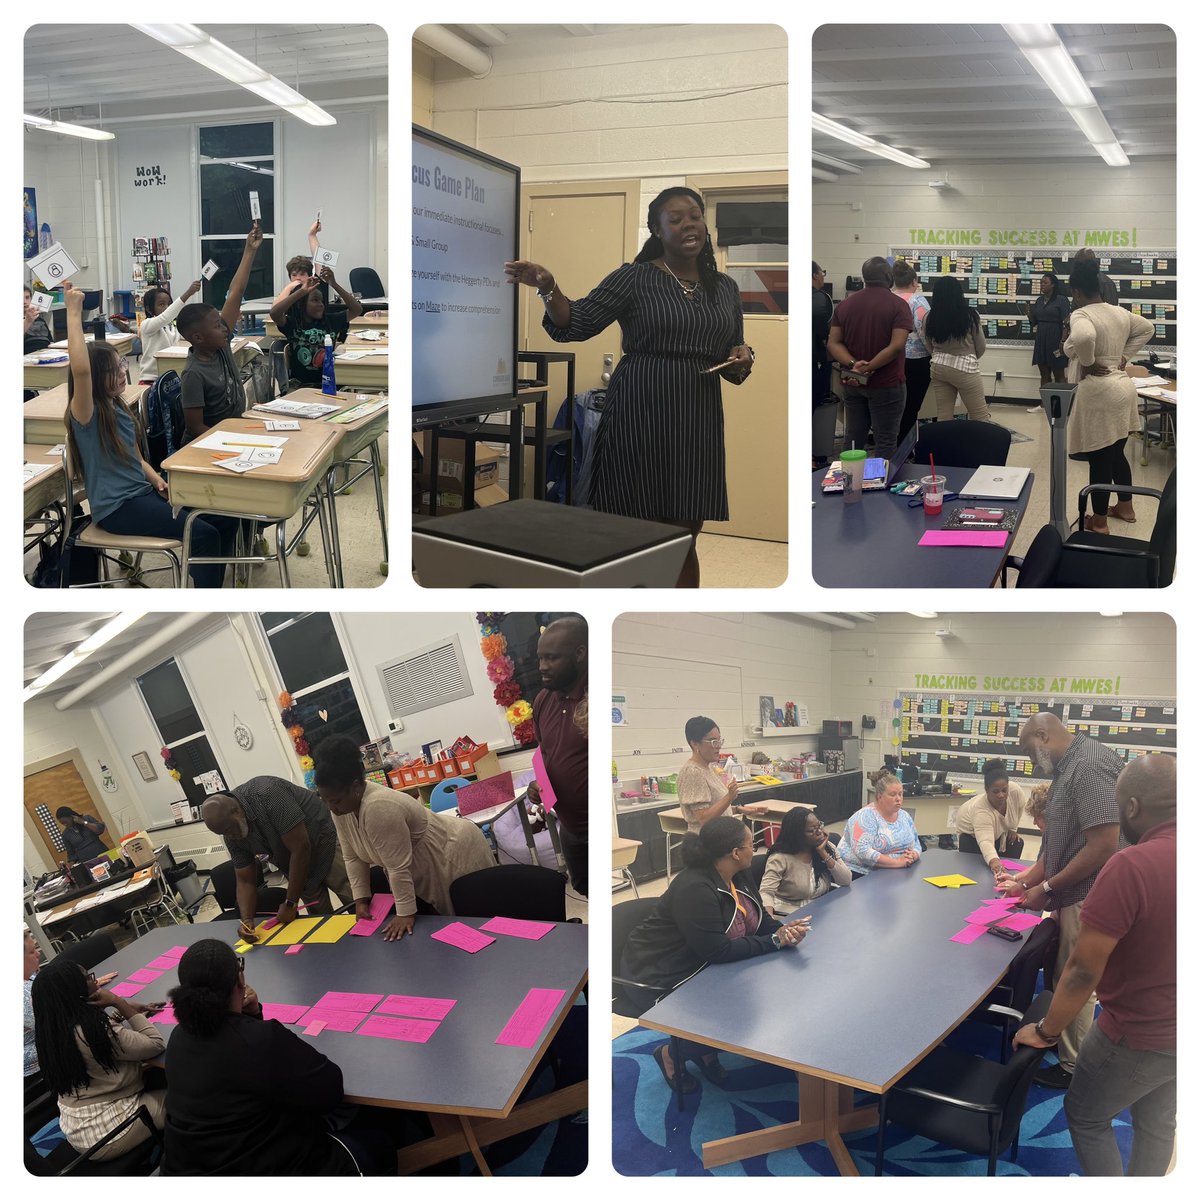 I can not even tell you how excited I was to be able to attend todays data discussion at @MWEStigers. The intentional data talks, and classroom groupings were ahhhhh-mazing!! Such a rockstar leadership team!! @taimonge